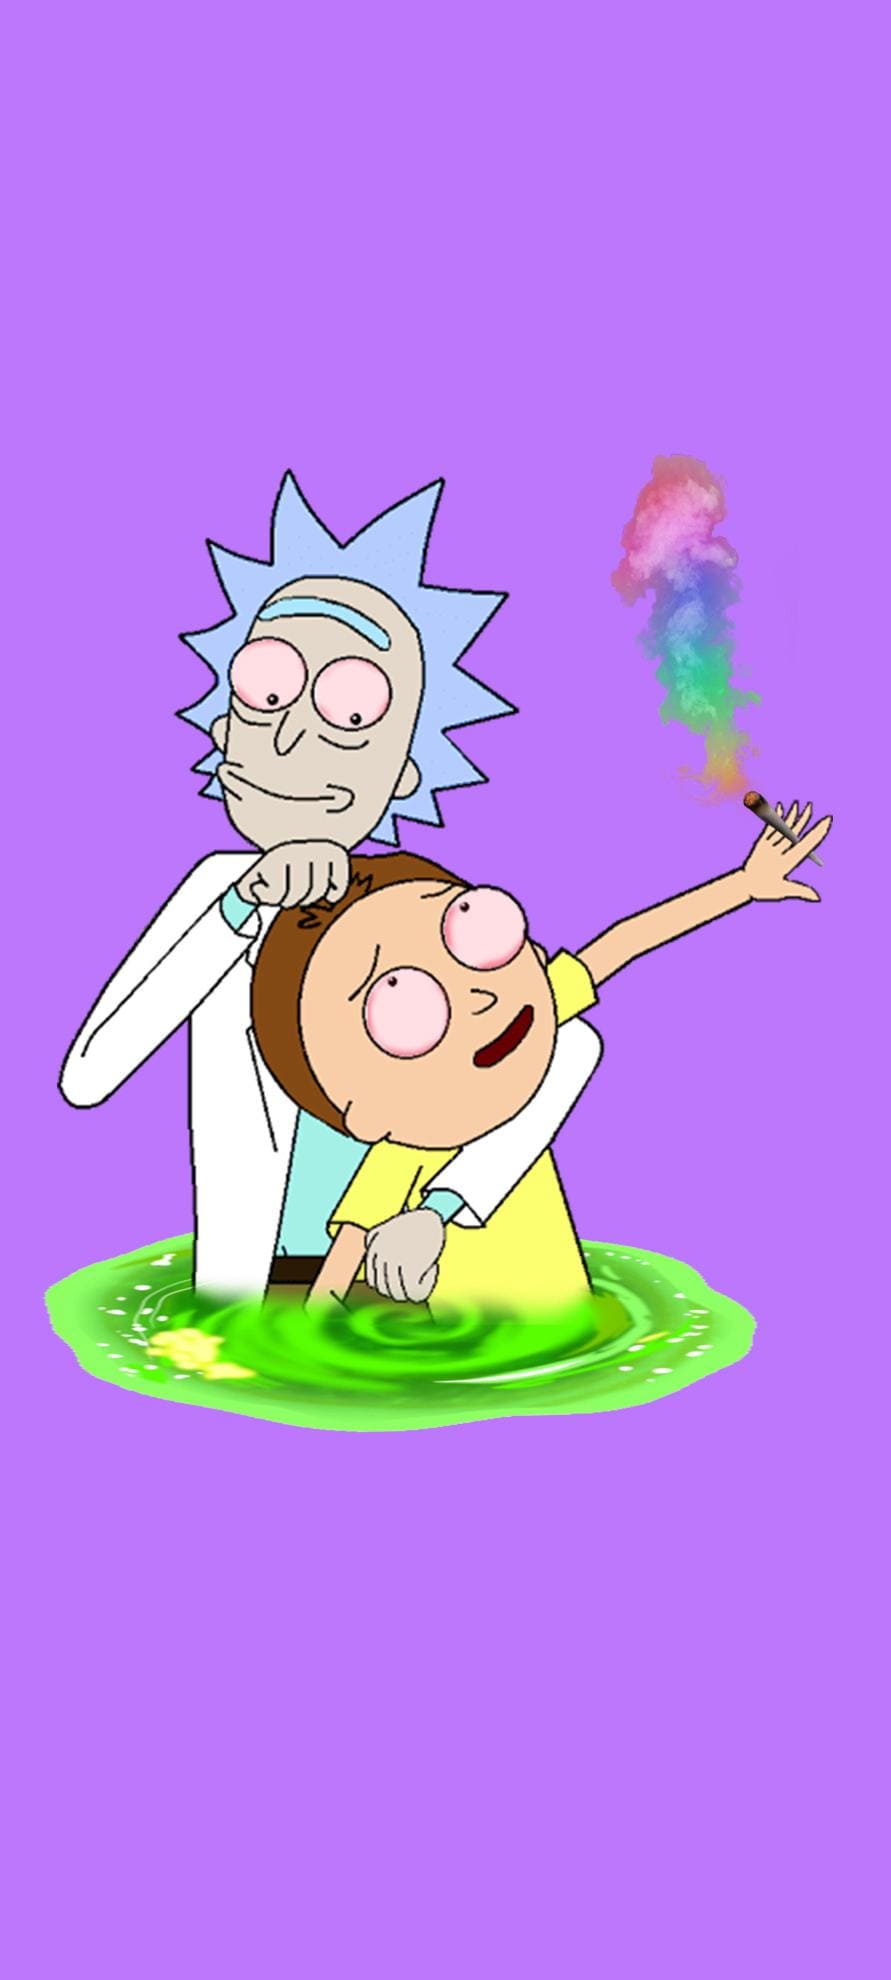 Rick And Morty iPhone Wallpaper To Download High Quality Rick And Morty iPhone Wallpaper